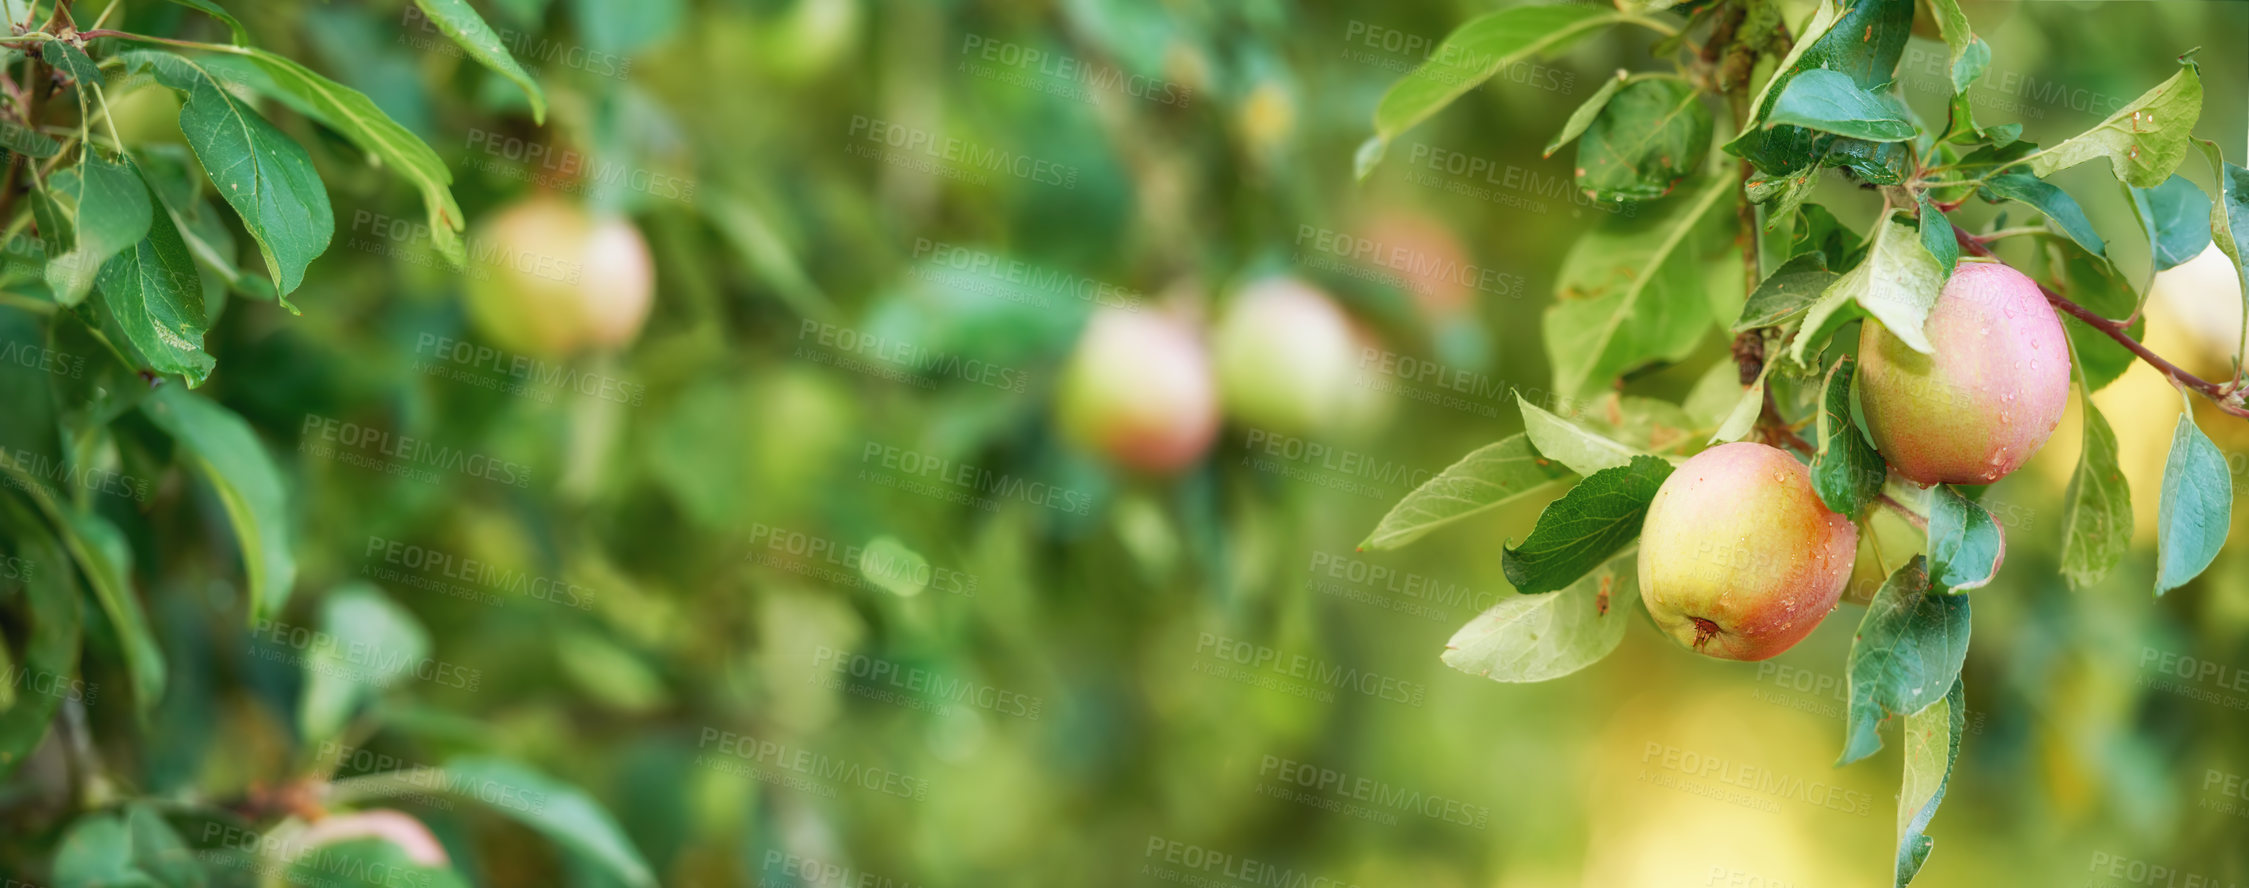 Buy stock photo Bunch of apples on a tree branch in an orchard on a sunny day outdoors. Closeup of fresh, sweet, and organic produce grown on a sustainable fruit farm. Ripe, juicy, and ready for picking and harvest